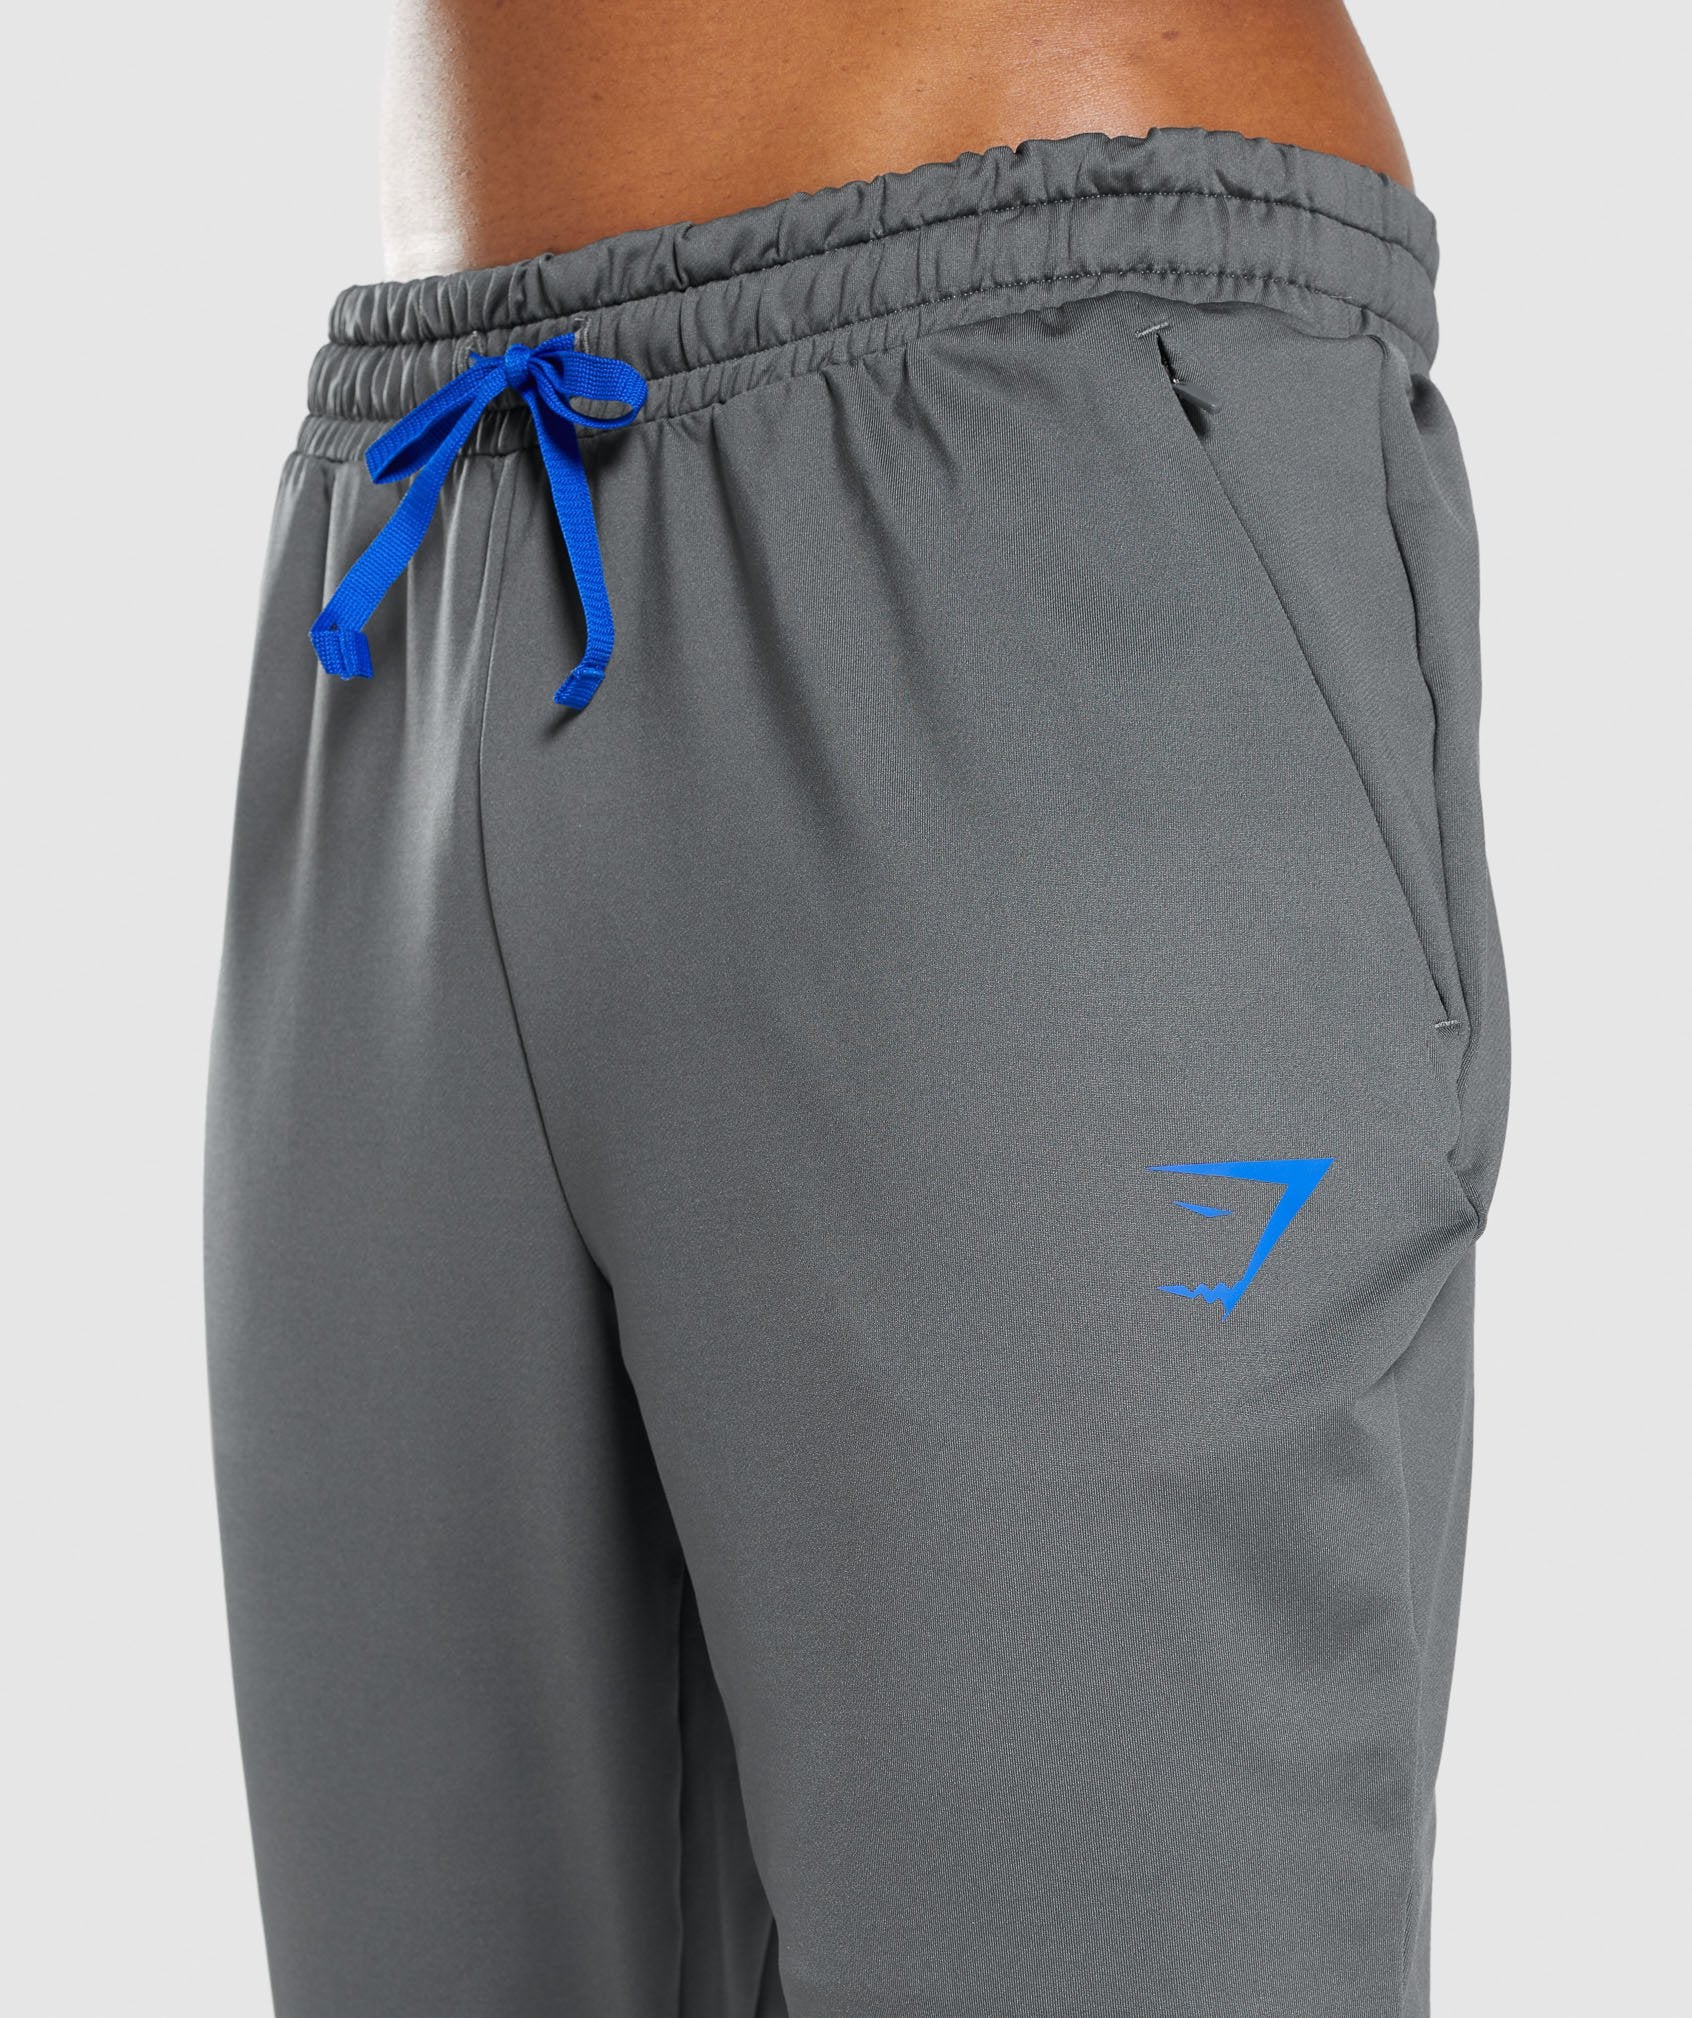 Regulate Training Joggers in Charcoal